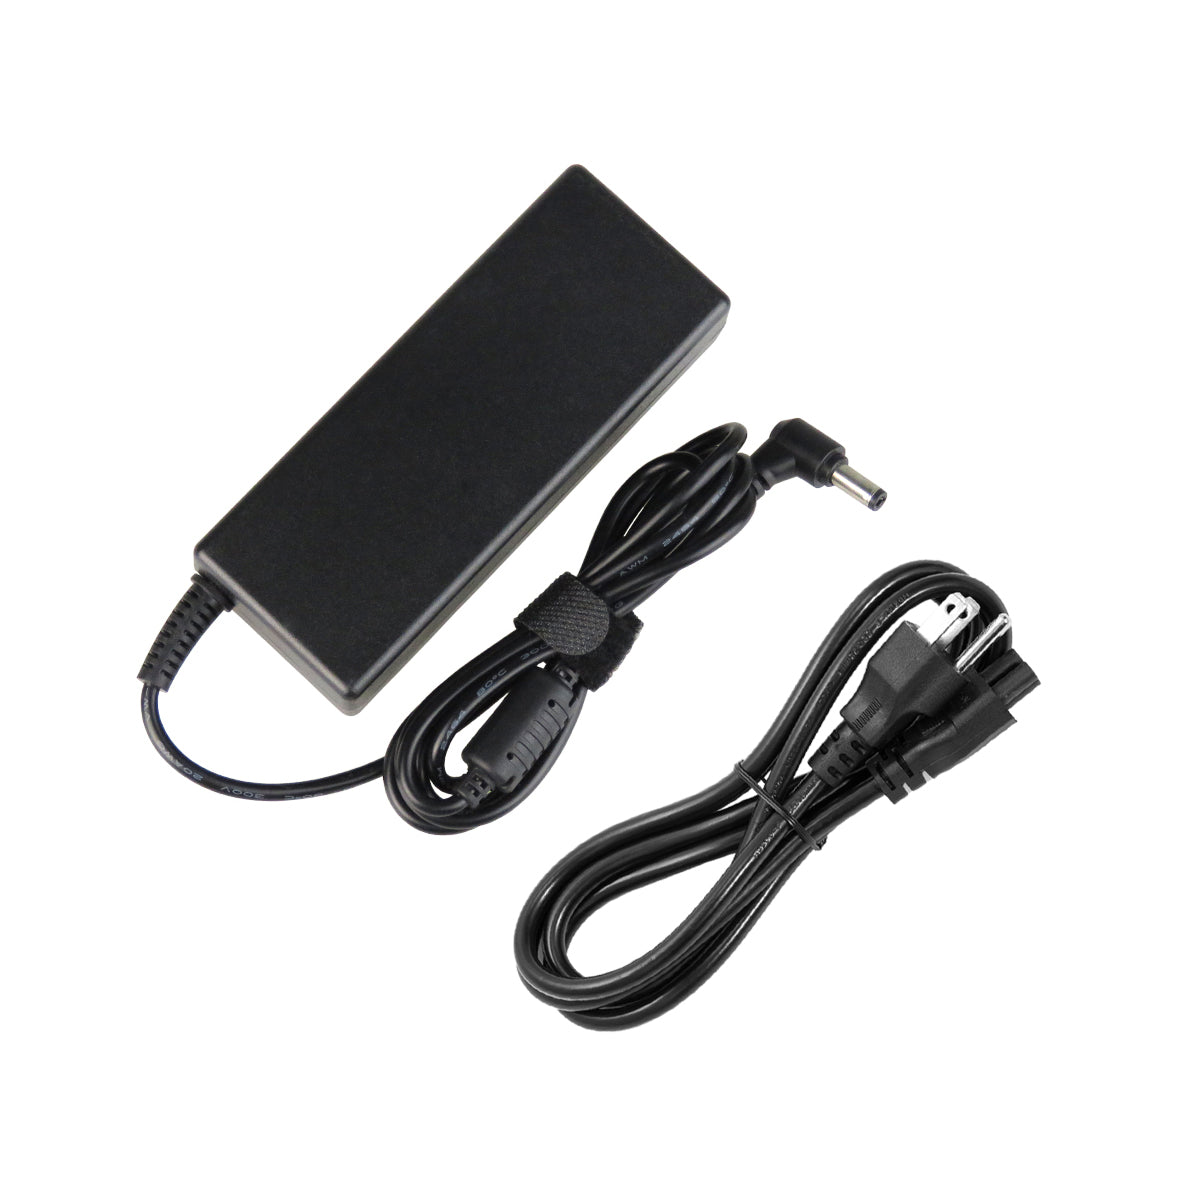 AC Adapter Charger for ASUS X54C-BBK5 Notebook.